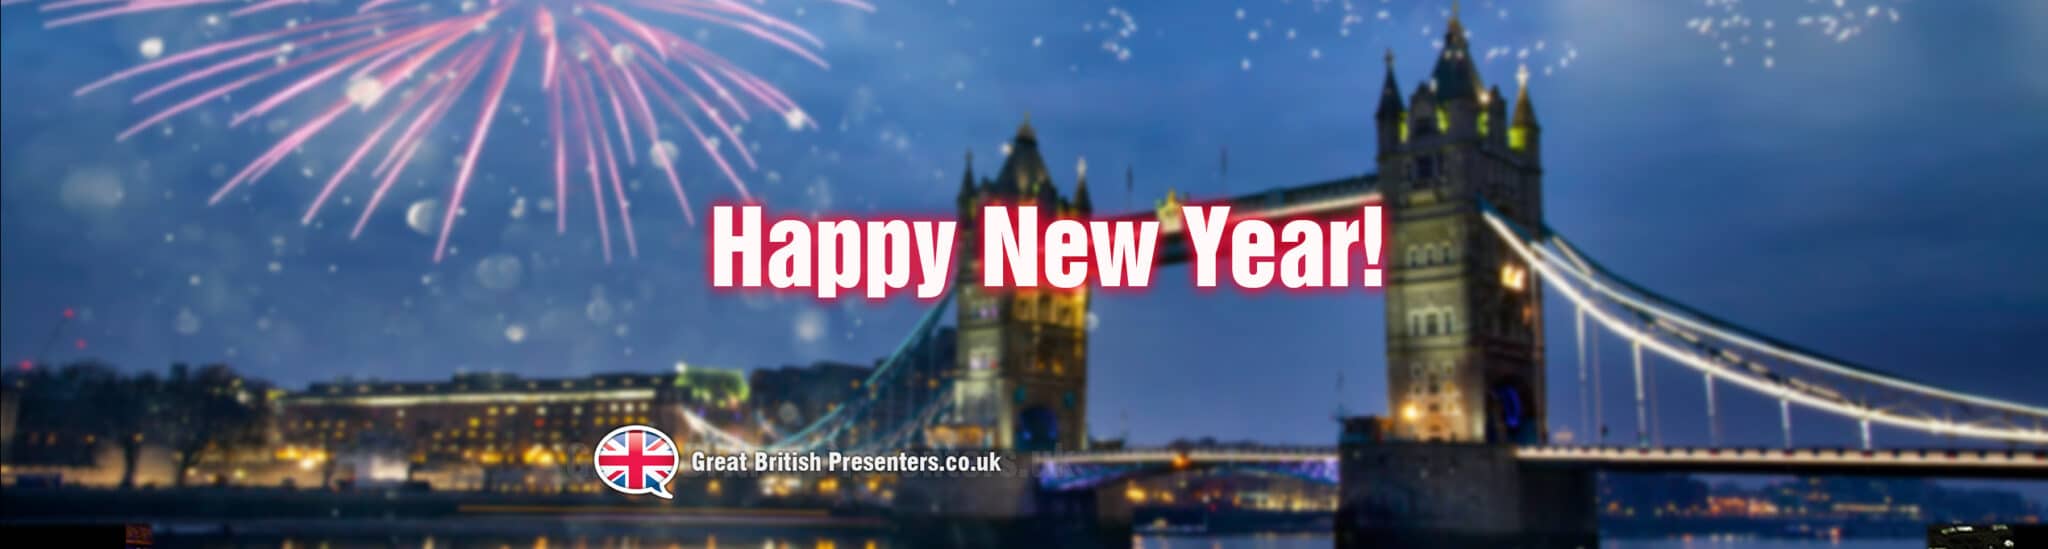 Happy New year from Great British Presenters